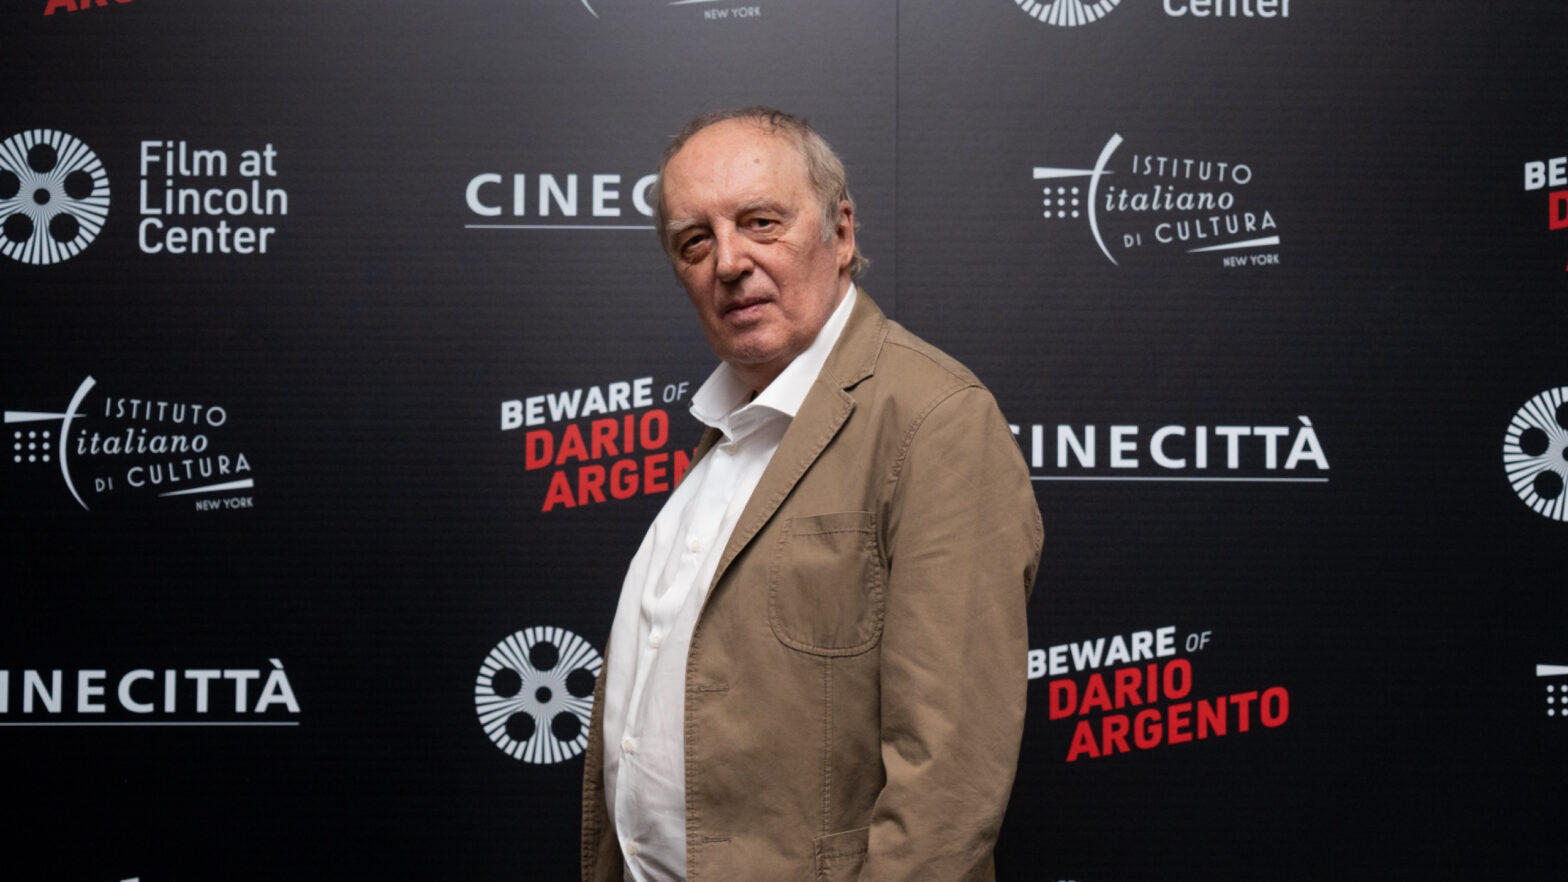 Dario Argento stands in front of a poster board with the logos of Italian film organizations.